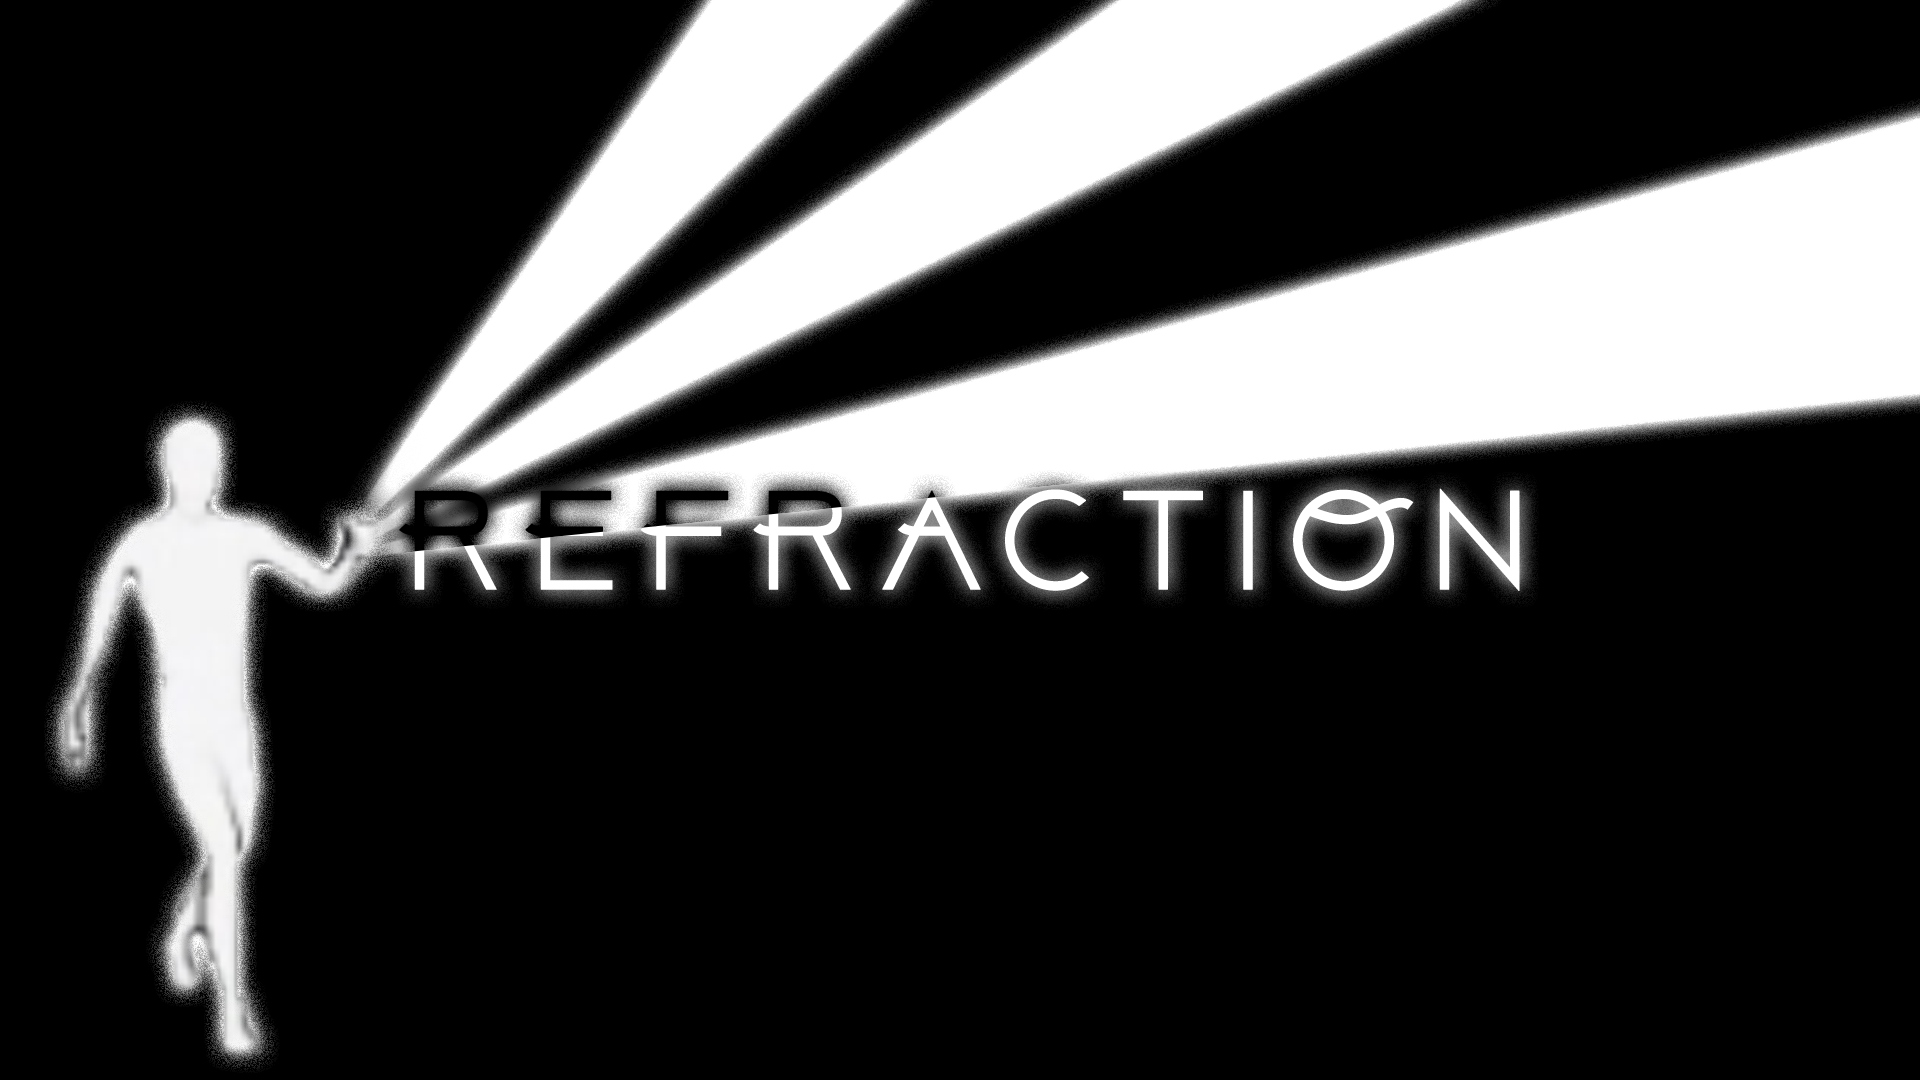 REFRACTION